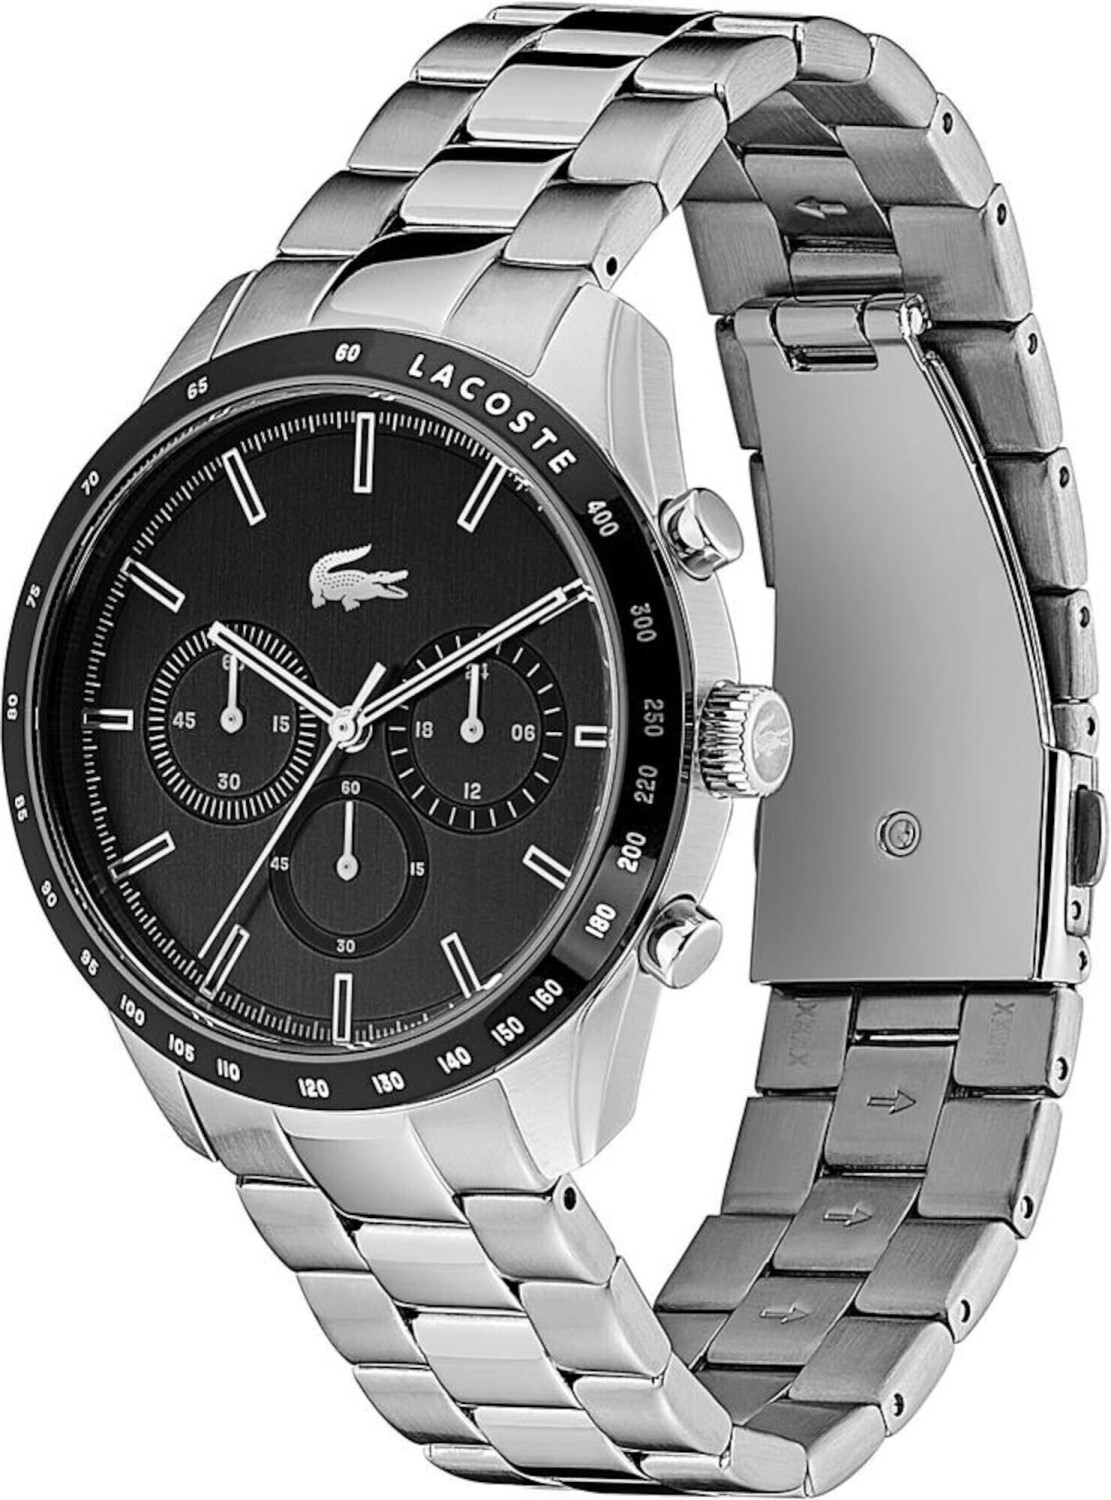 Hohe Qualität und maximale Ersparnis Buy Lacoste Best (Today) Deals on Boston Chronograph from – £122.42